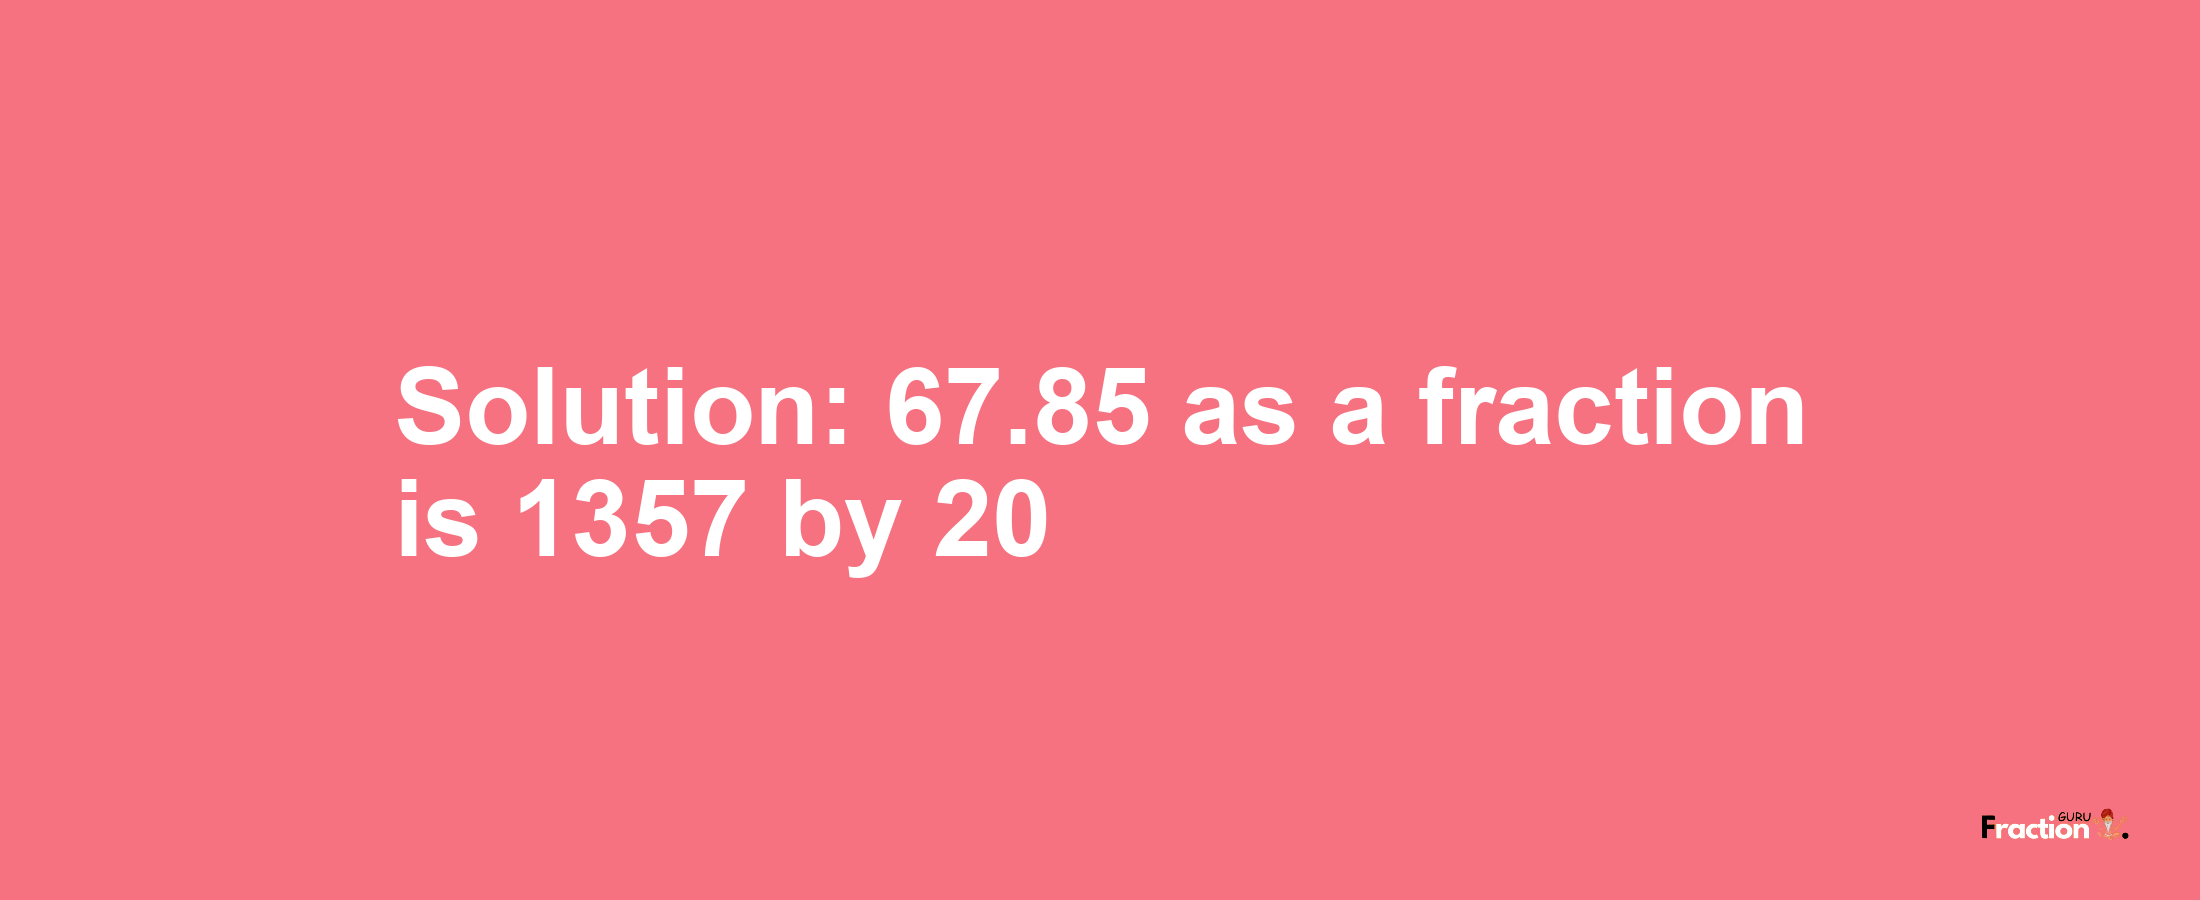 Solution:67.85 as a fraction is 1357/20